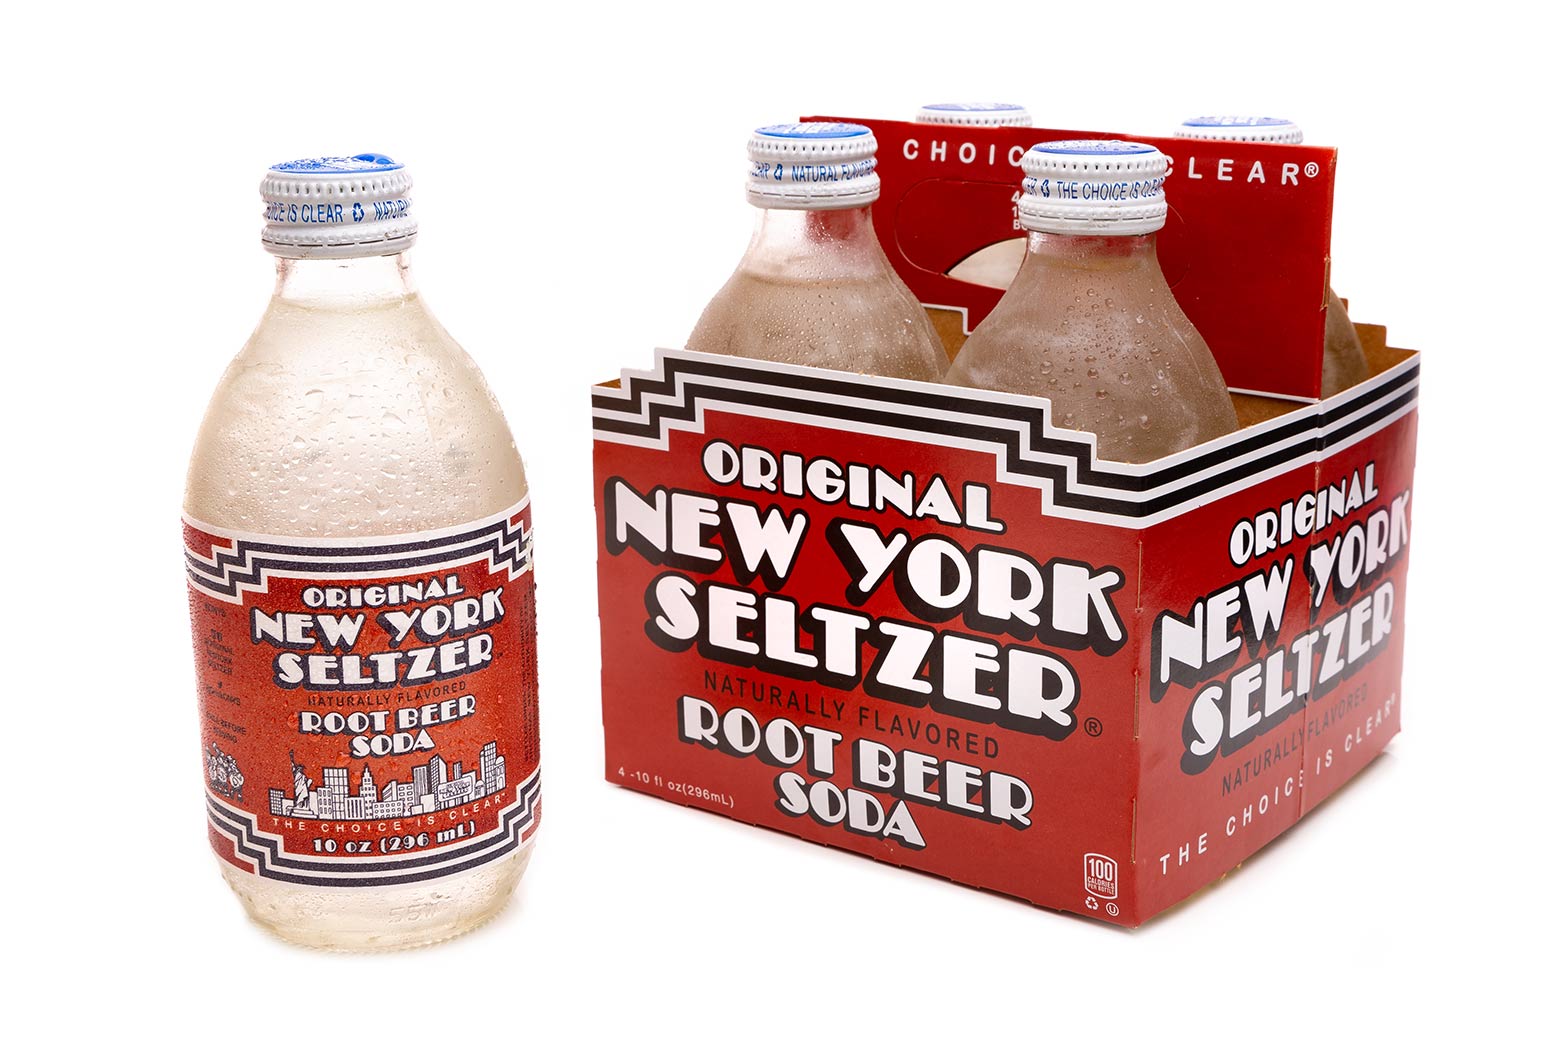 Original New York Seltzer Root Beer 4-pack carrier with bottle